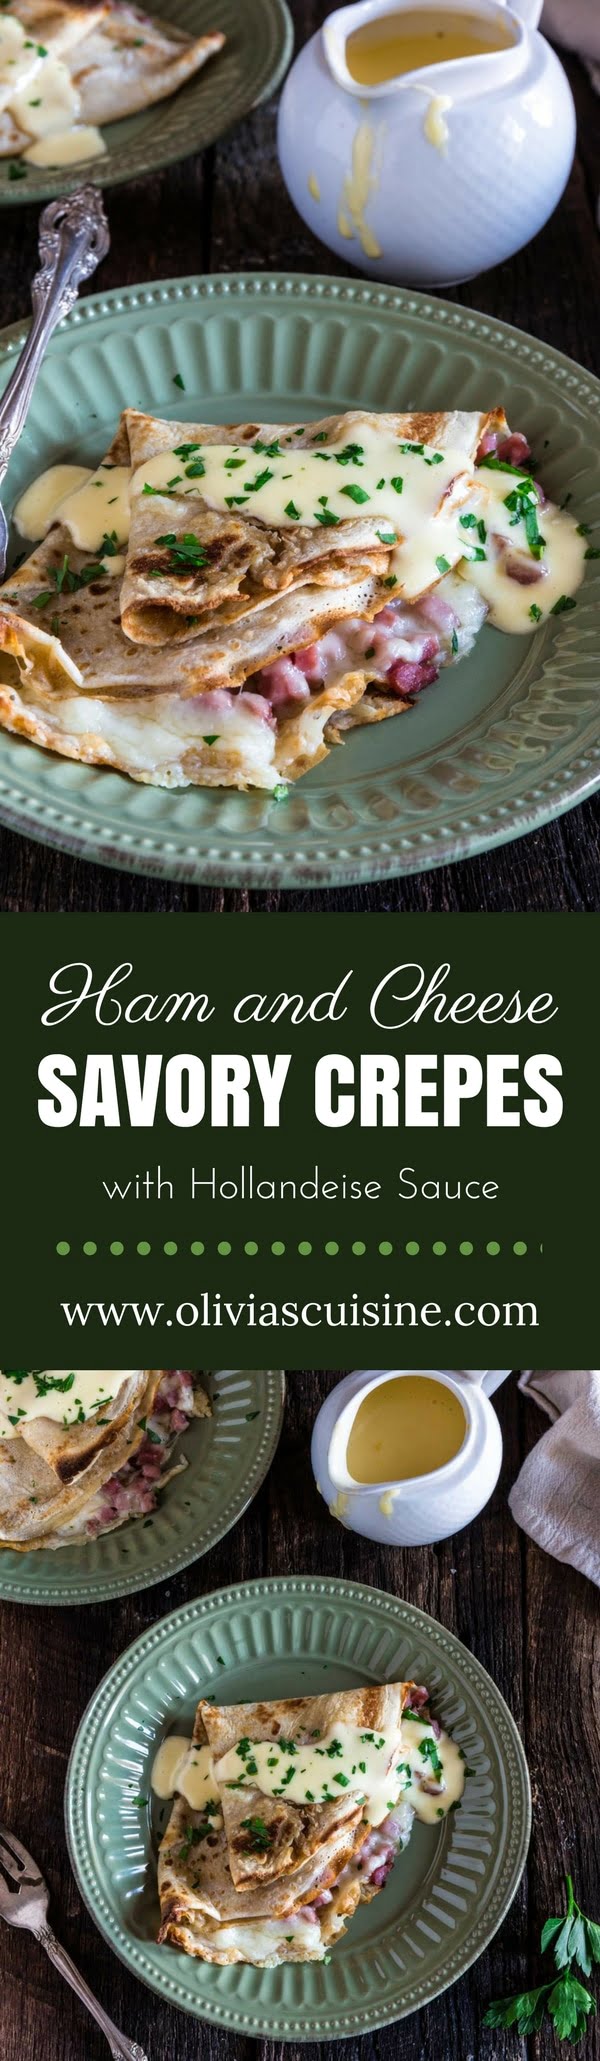 Ham and Cheese Savory Crepes with Hollandaise Sauce | www.oliviascuisine.com | These Ham and Cheese Savory Crepes are beyond fantastic, easy to make and will take breakfast (or brunch) to a whole new level. #AD